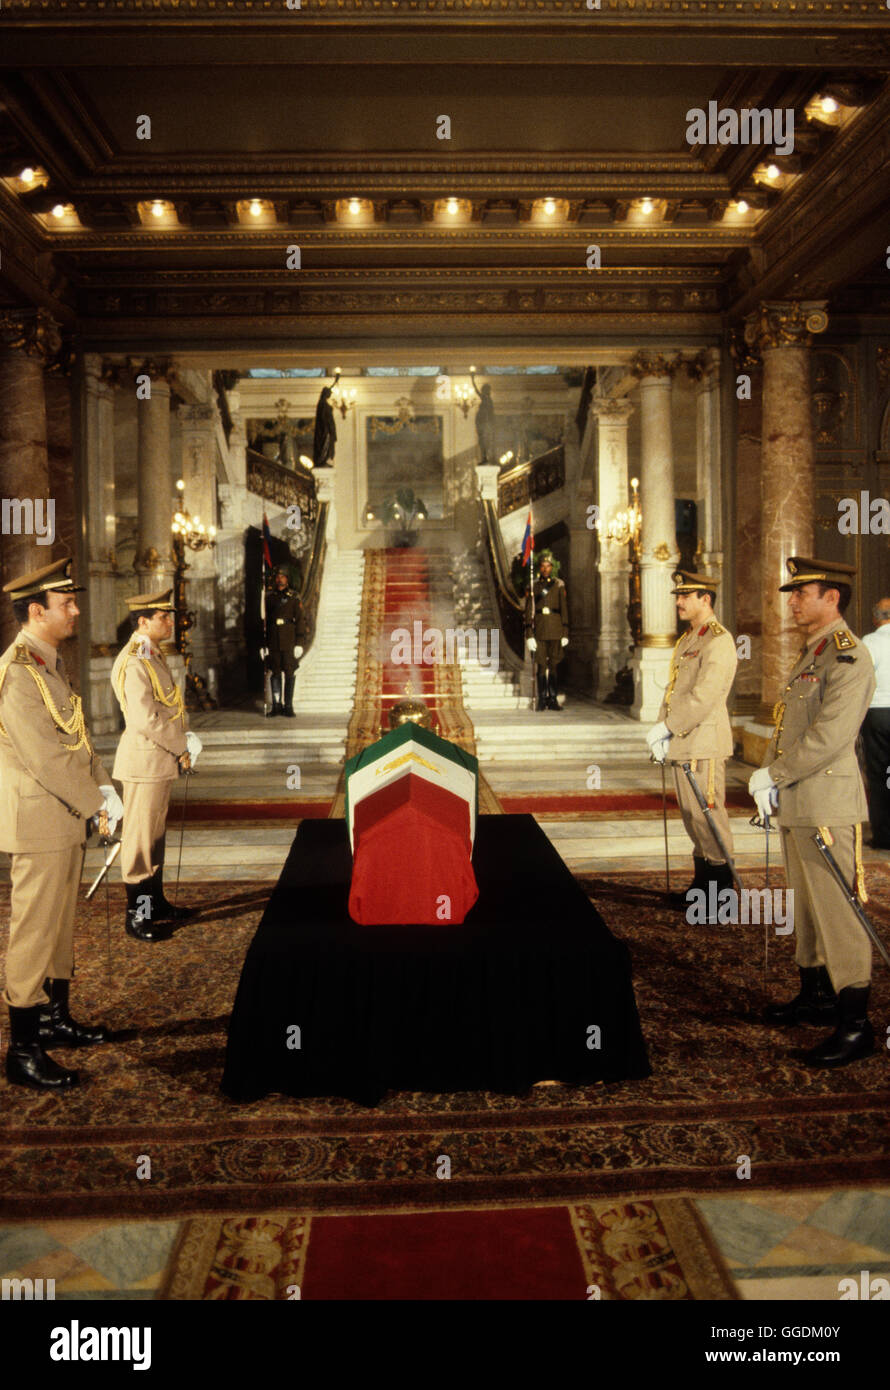 Shah of Iran his state funeral Cairo Egypt. Guards stand over the coffin at The Lying in State at the Abdin Palace.1980 HOMER SYKES Stock Photo